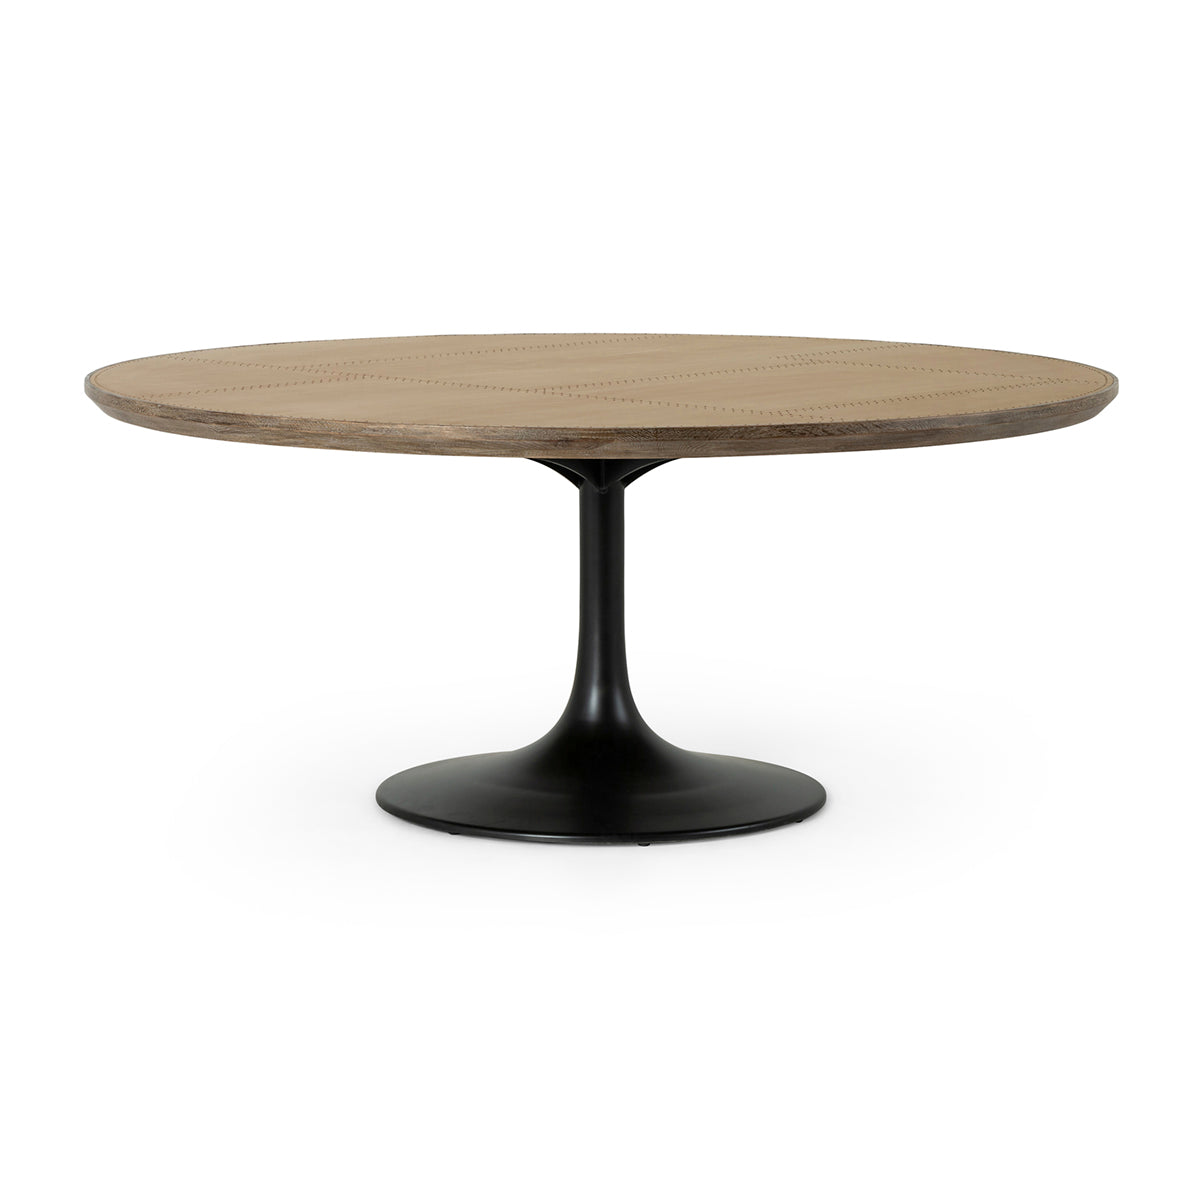 PERRY DINING TABLE IN BRIGHT BRASS CLAD